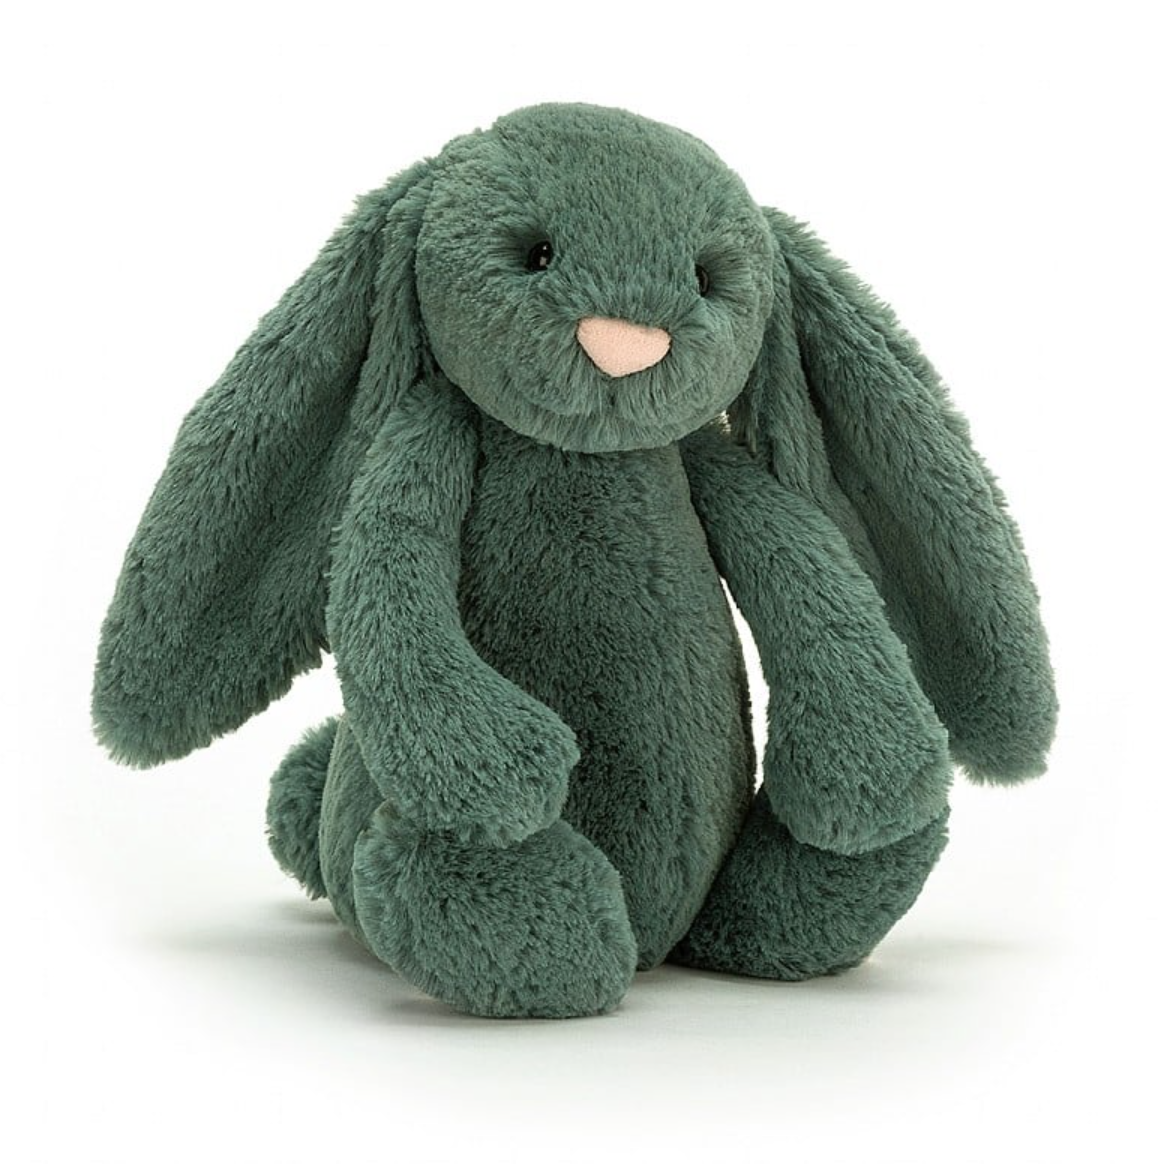 Jellycat Bashful Bunny Medium Soft Toys in Forest at Wrapsody